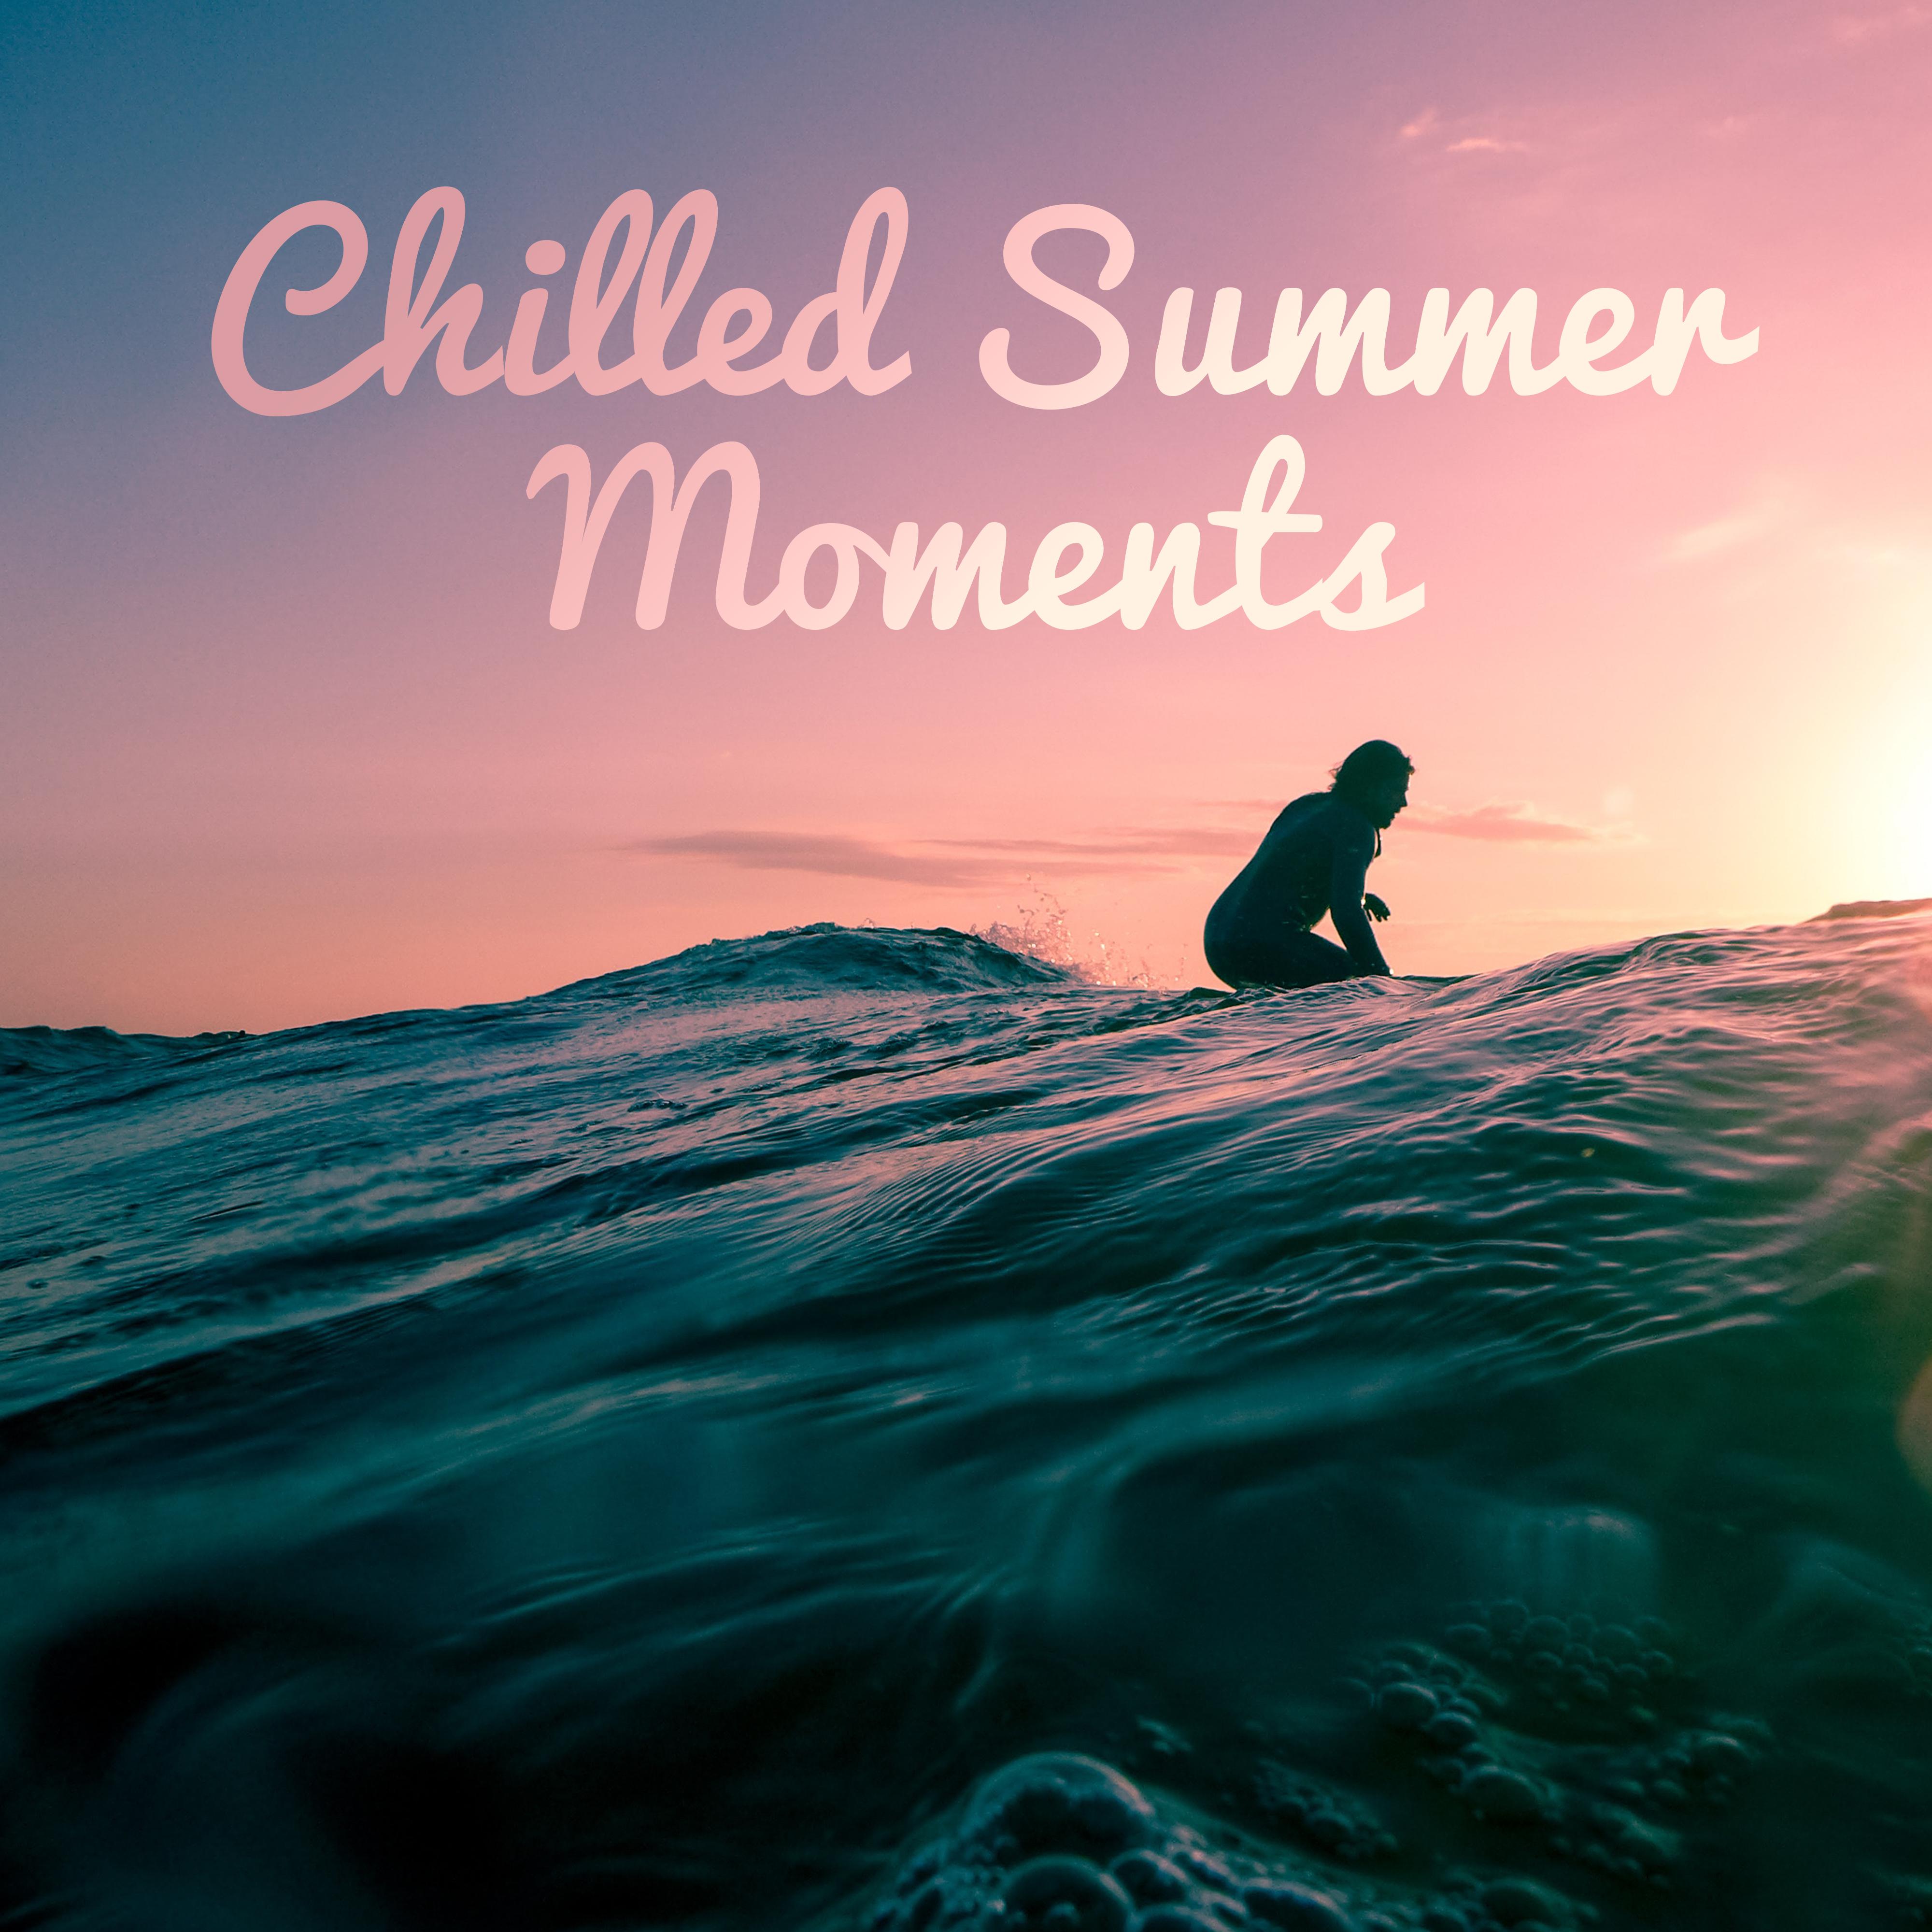 Chilled Summer Moments